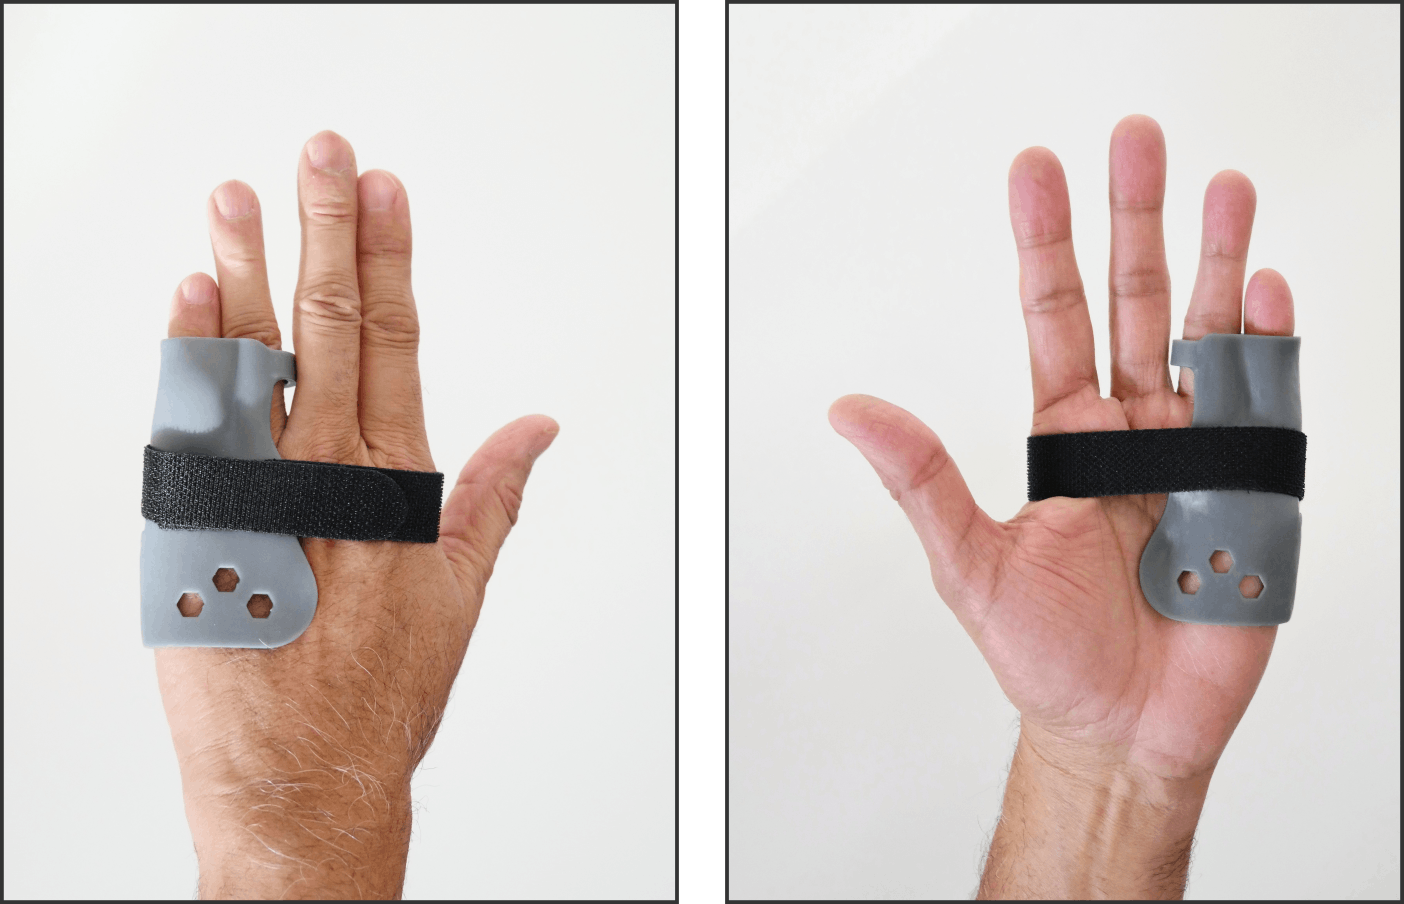 Front and back of hand showing how the prototype sits on the hand